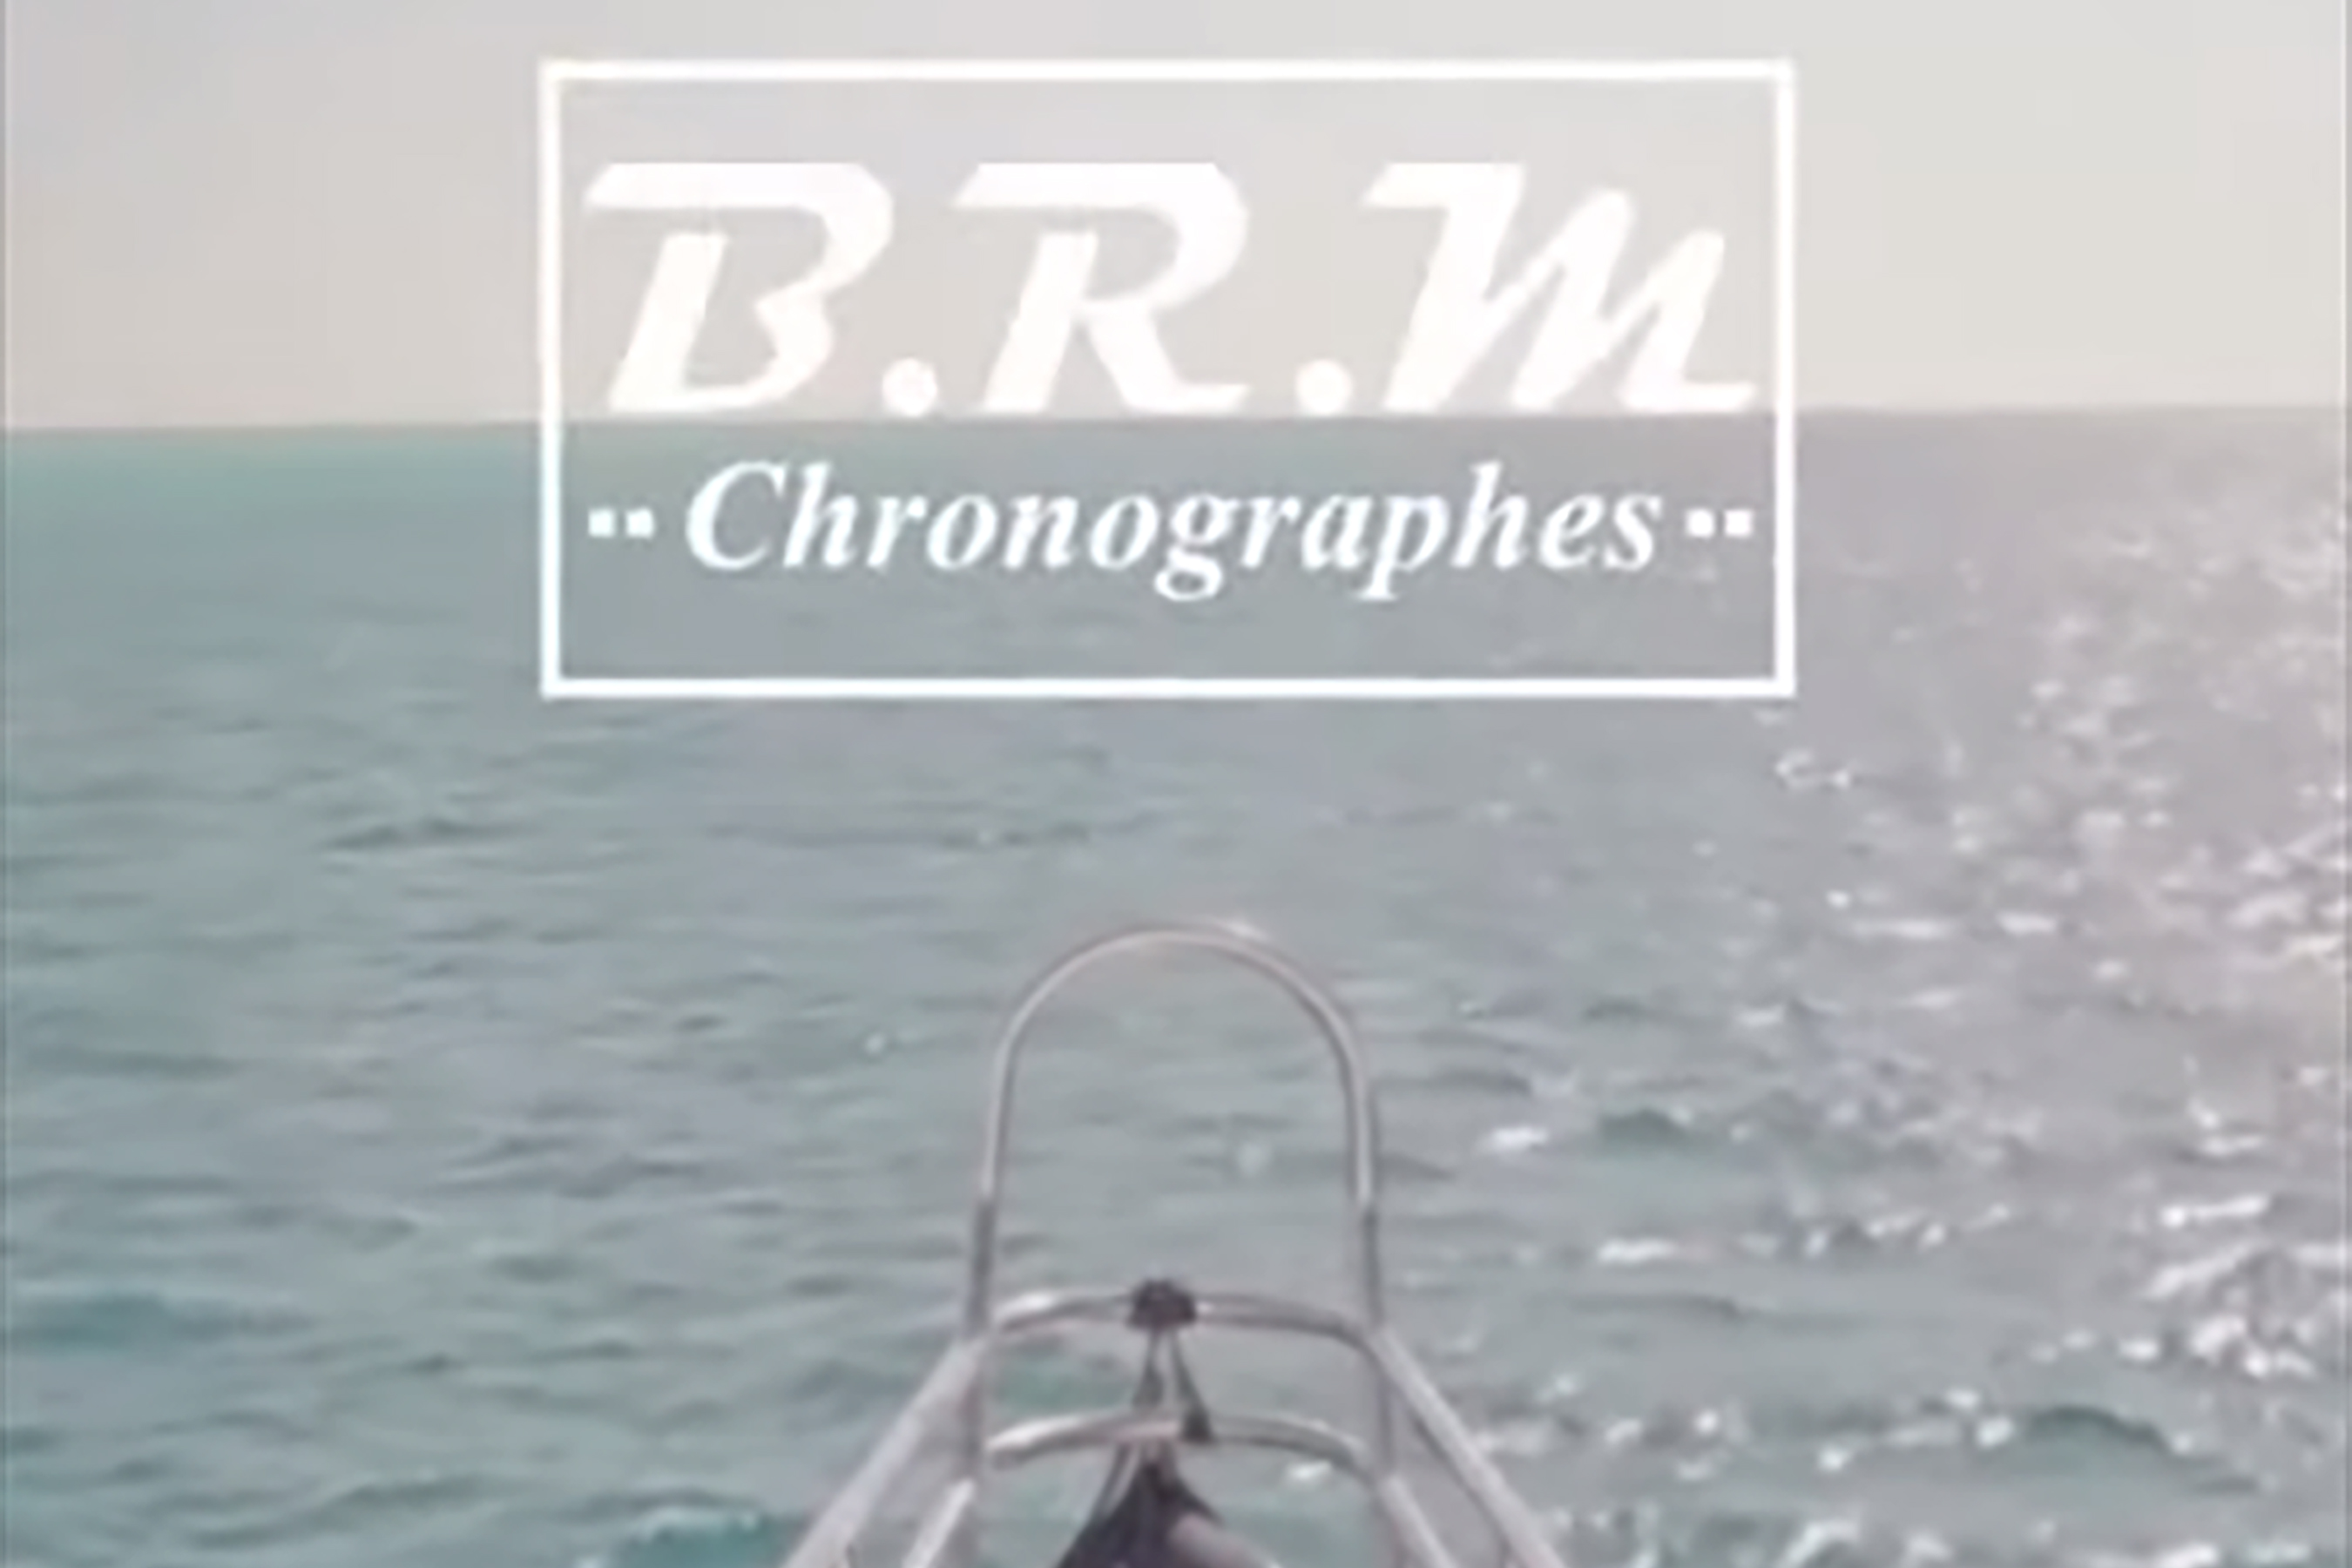 New B.R.M Chronographes Boat Master collection video